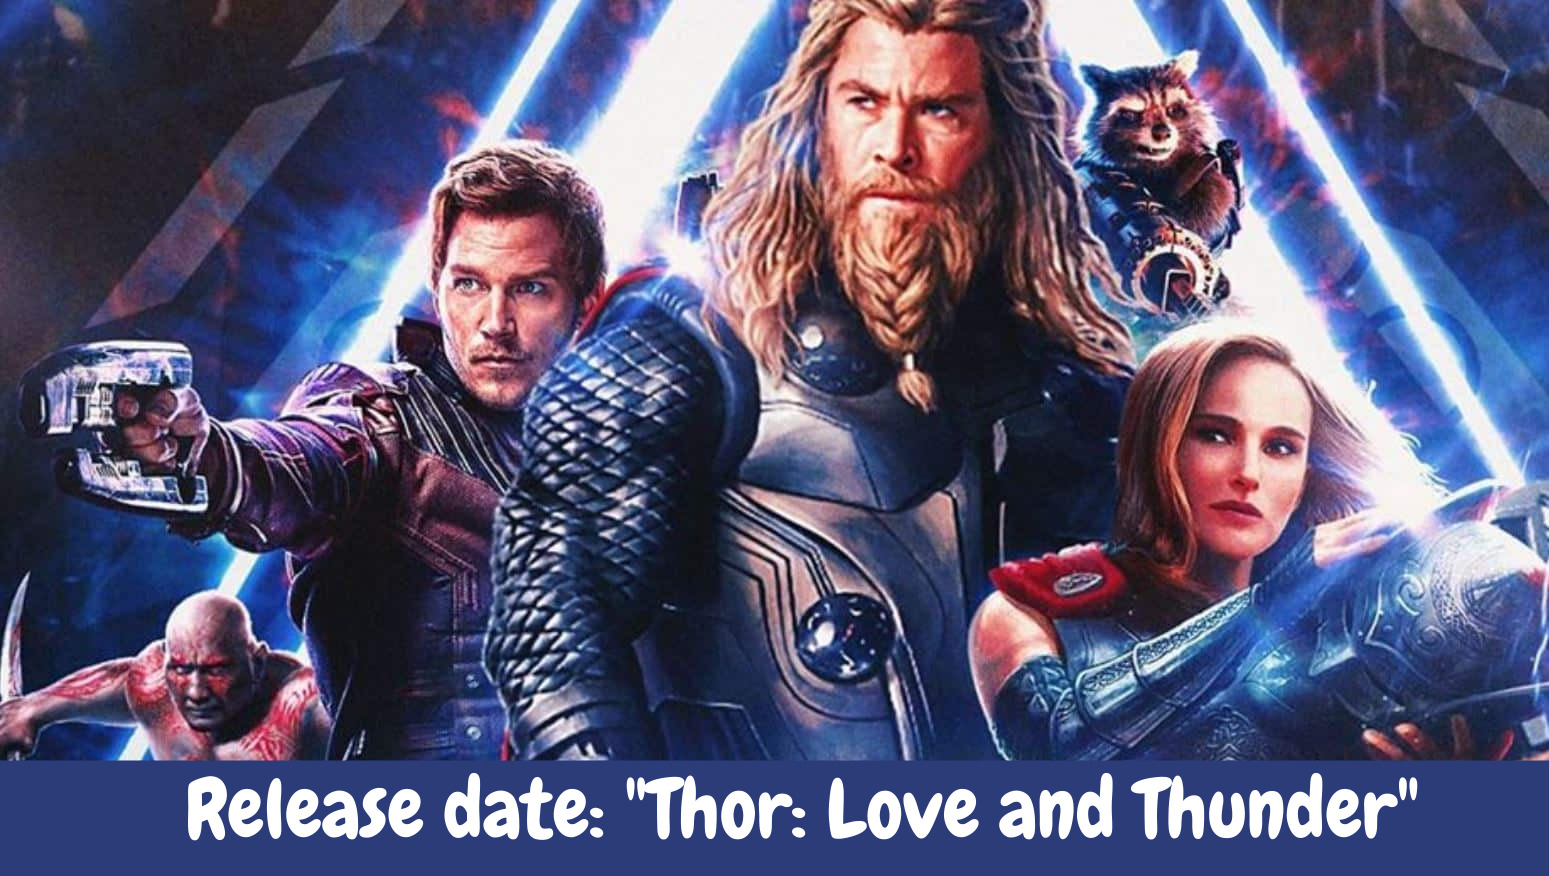 Release date: "Thor: Love and Thunder"